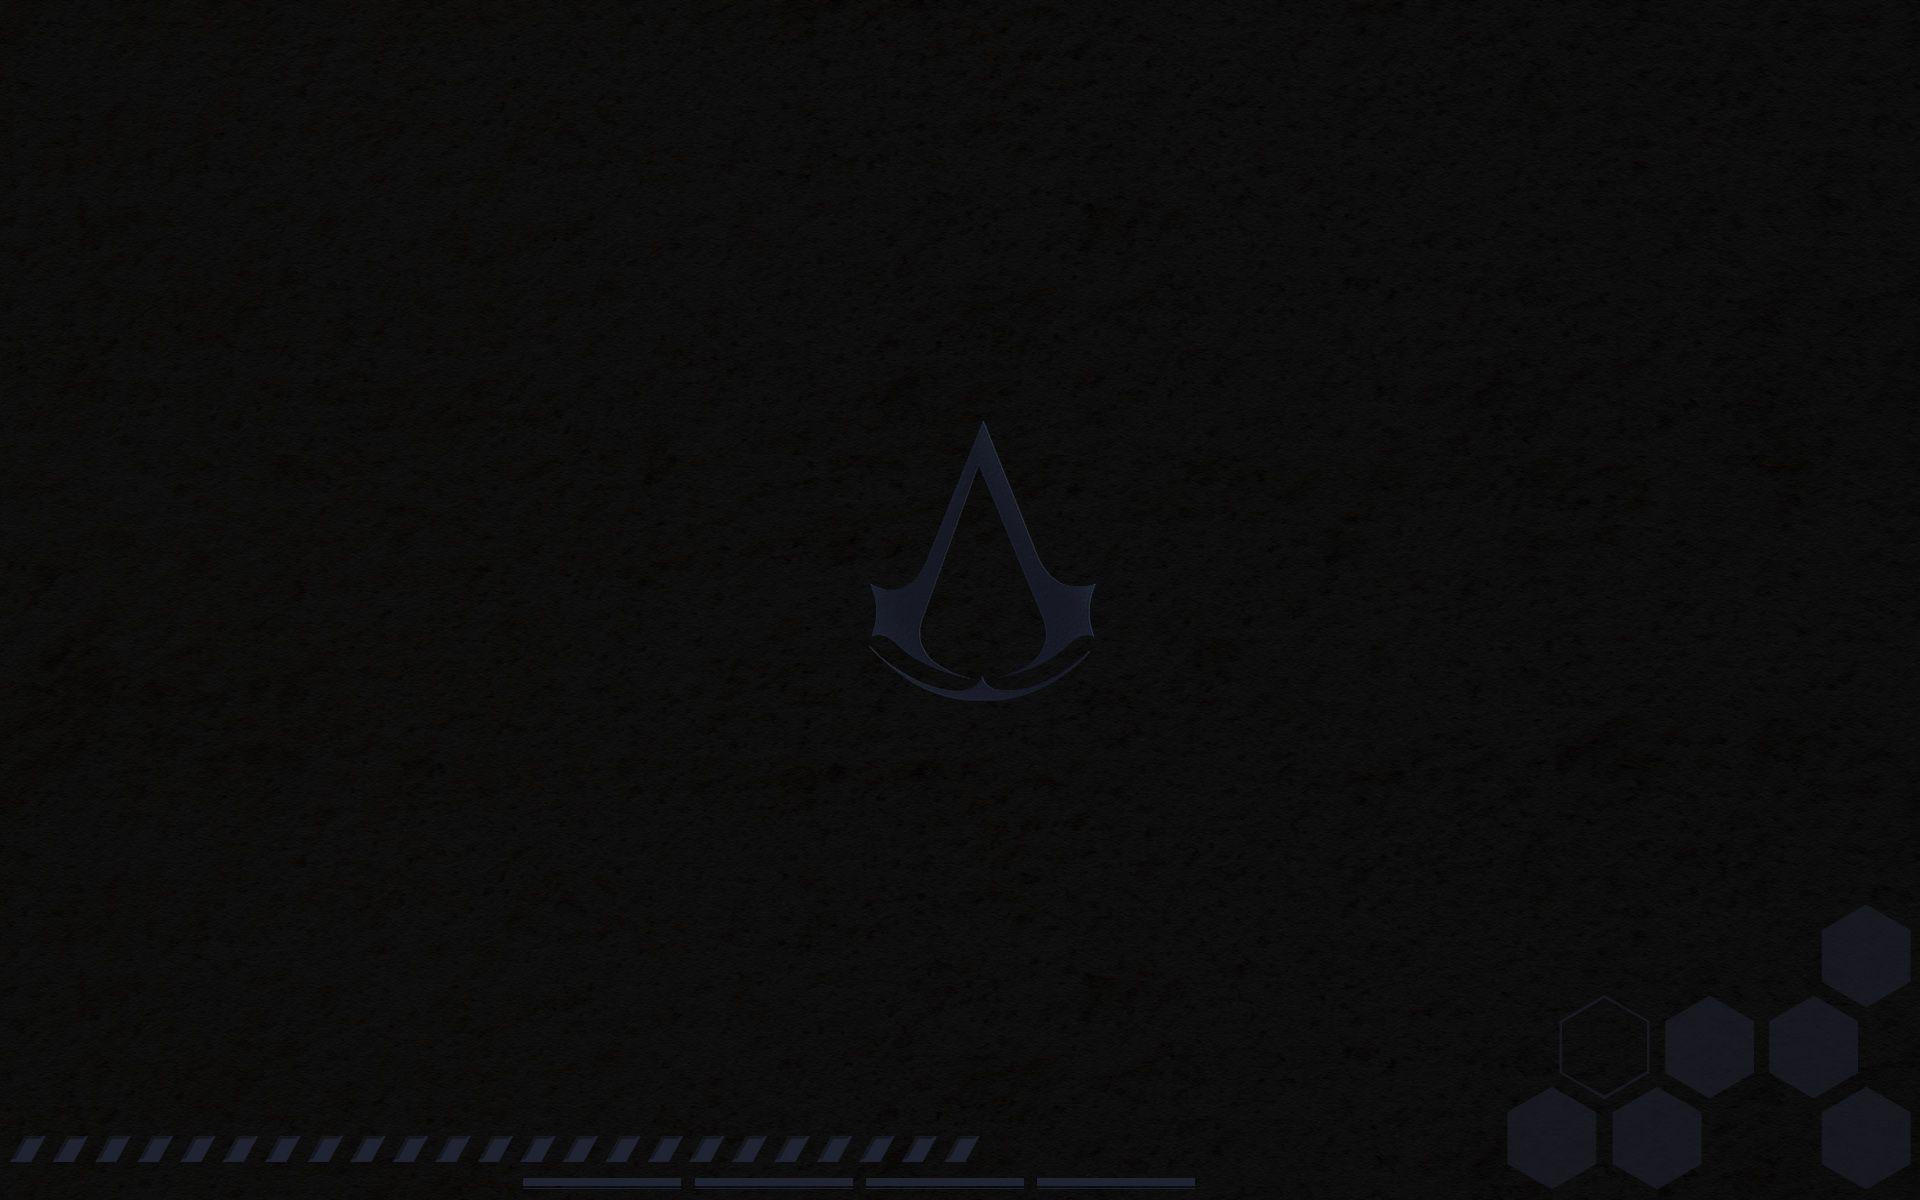 Download 4k Assassin's Creed Valhalla Background Side Profile | Wallpapers .com